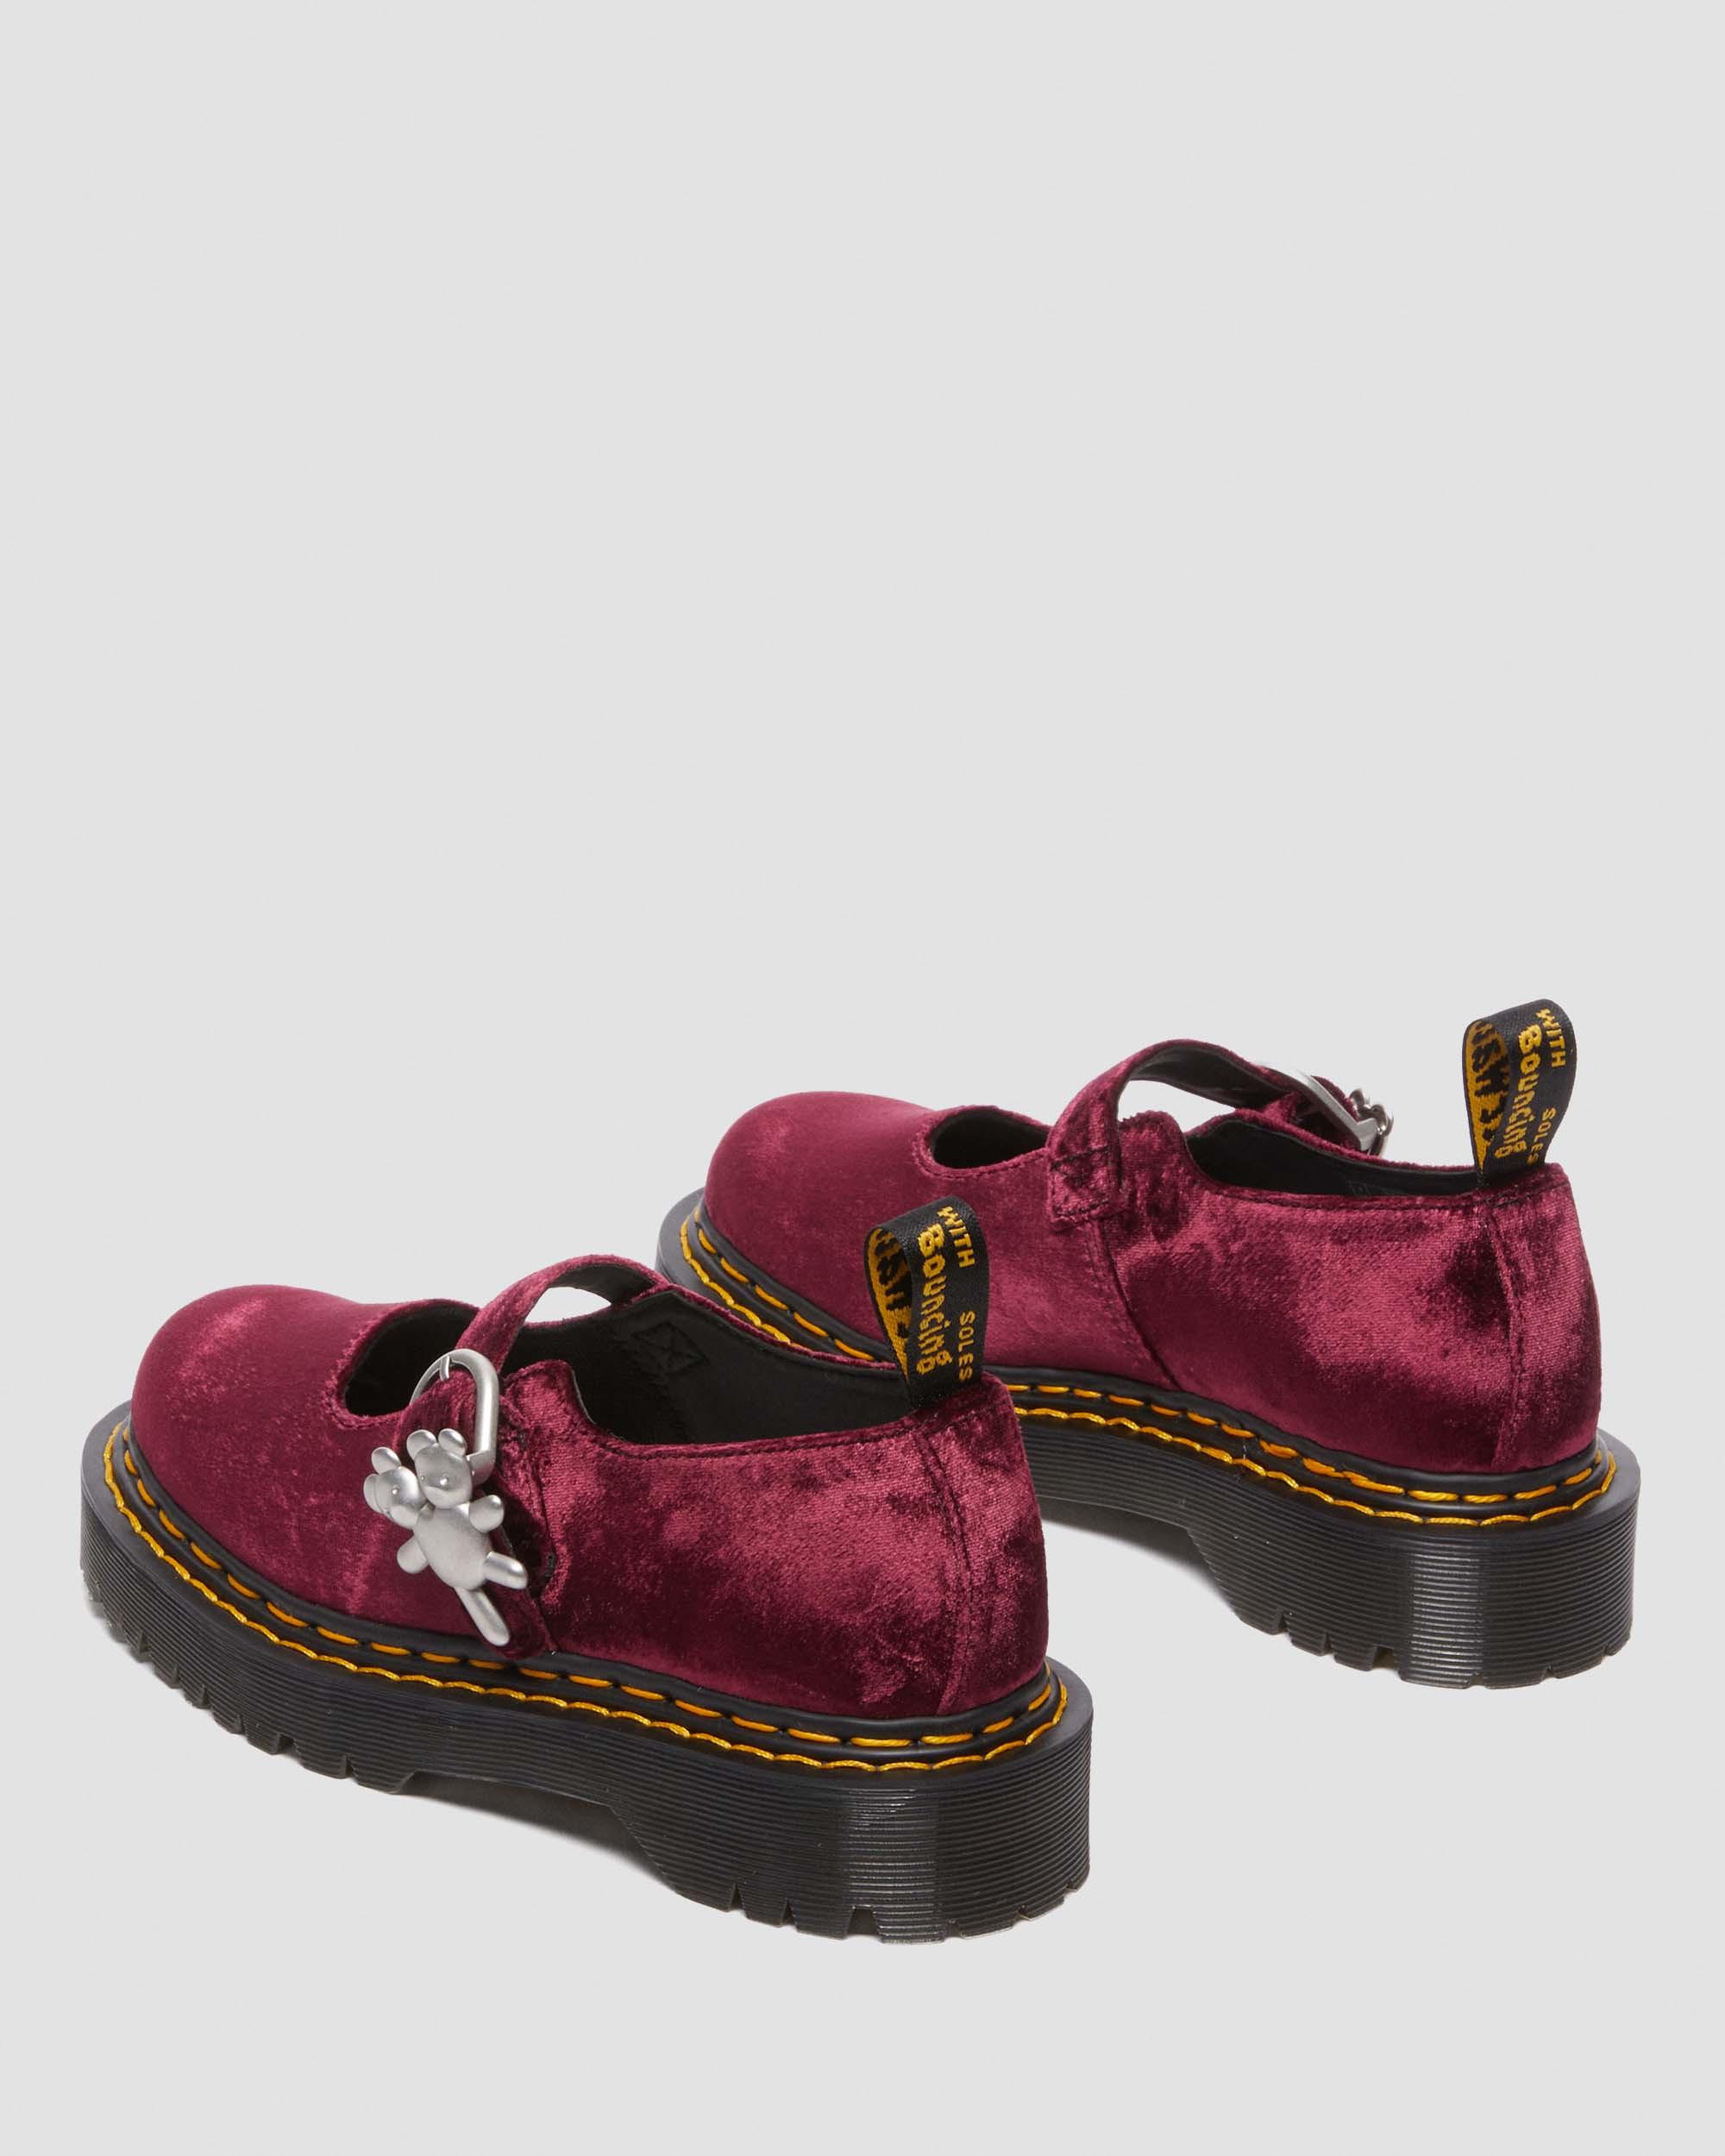 ADDINA BEX HEAVEN BY MARC JACOBS SAMT-SCHUHE in Cherry Red